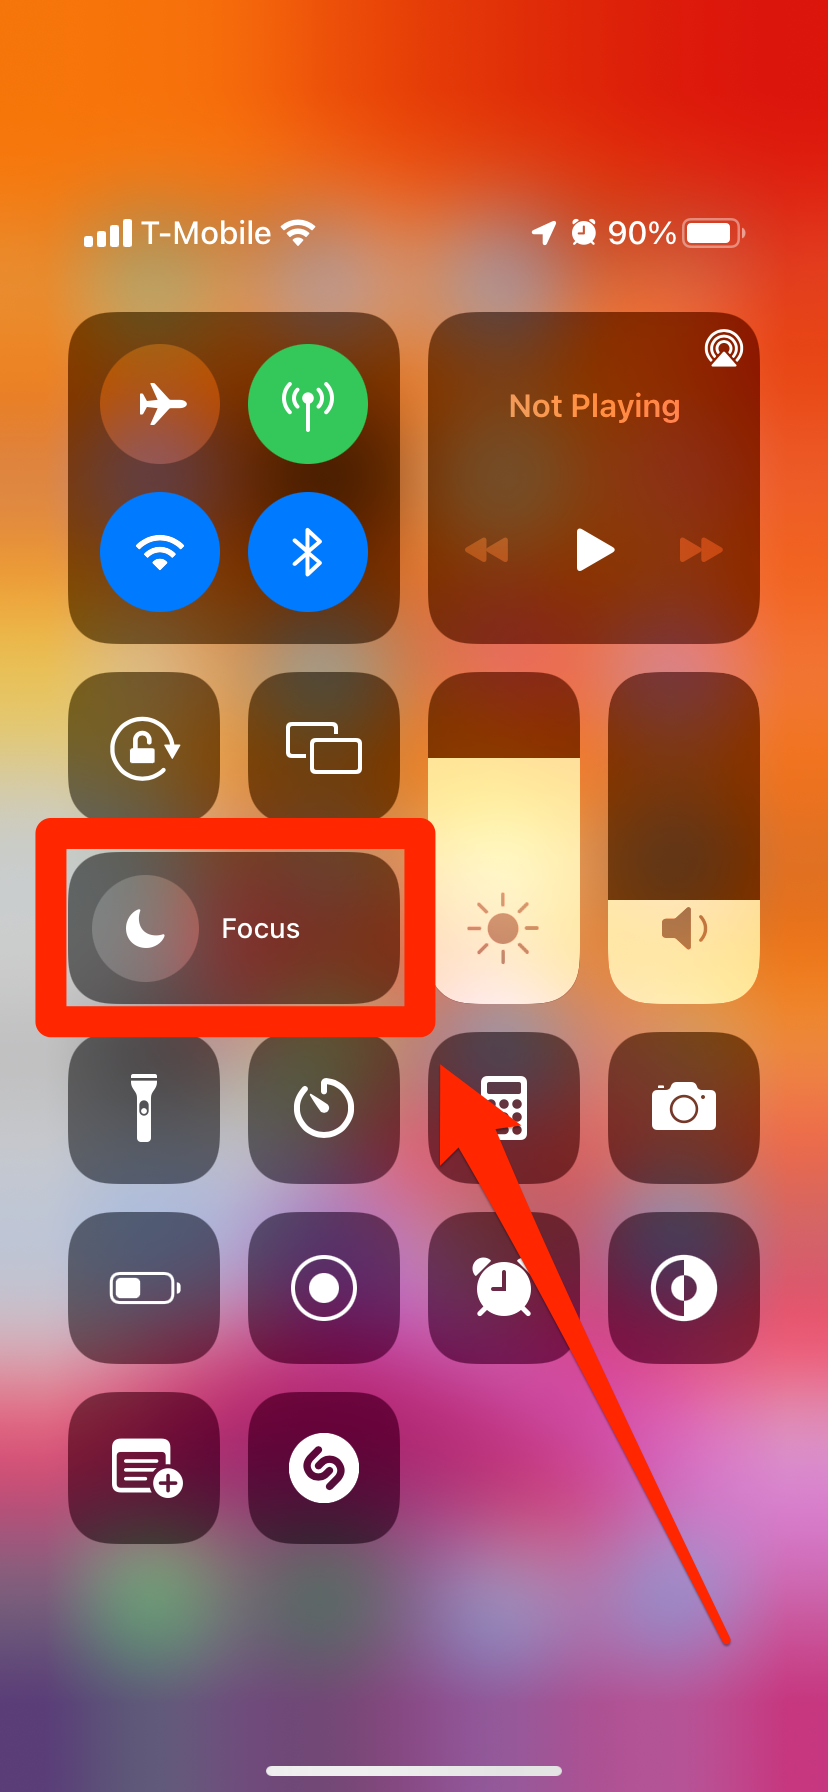 An iPhone's Control Center, with the gray Focus option highlighted.